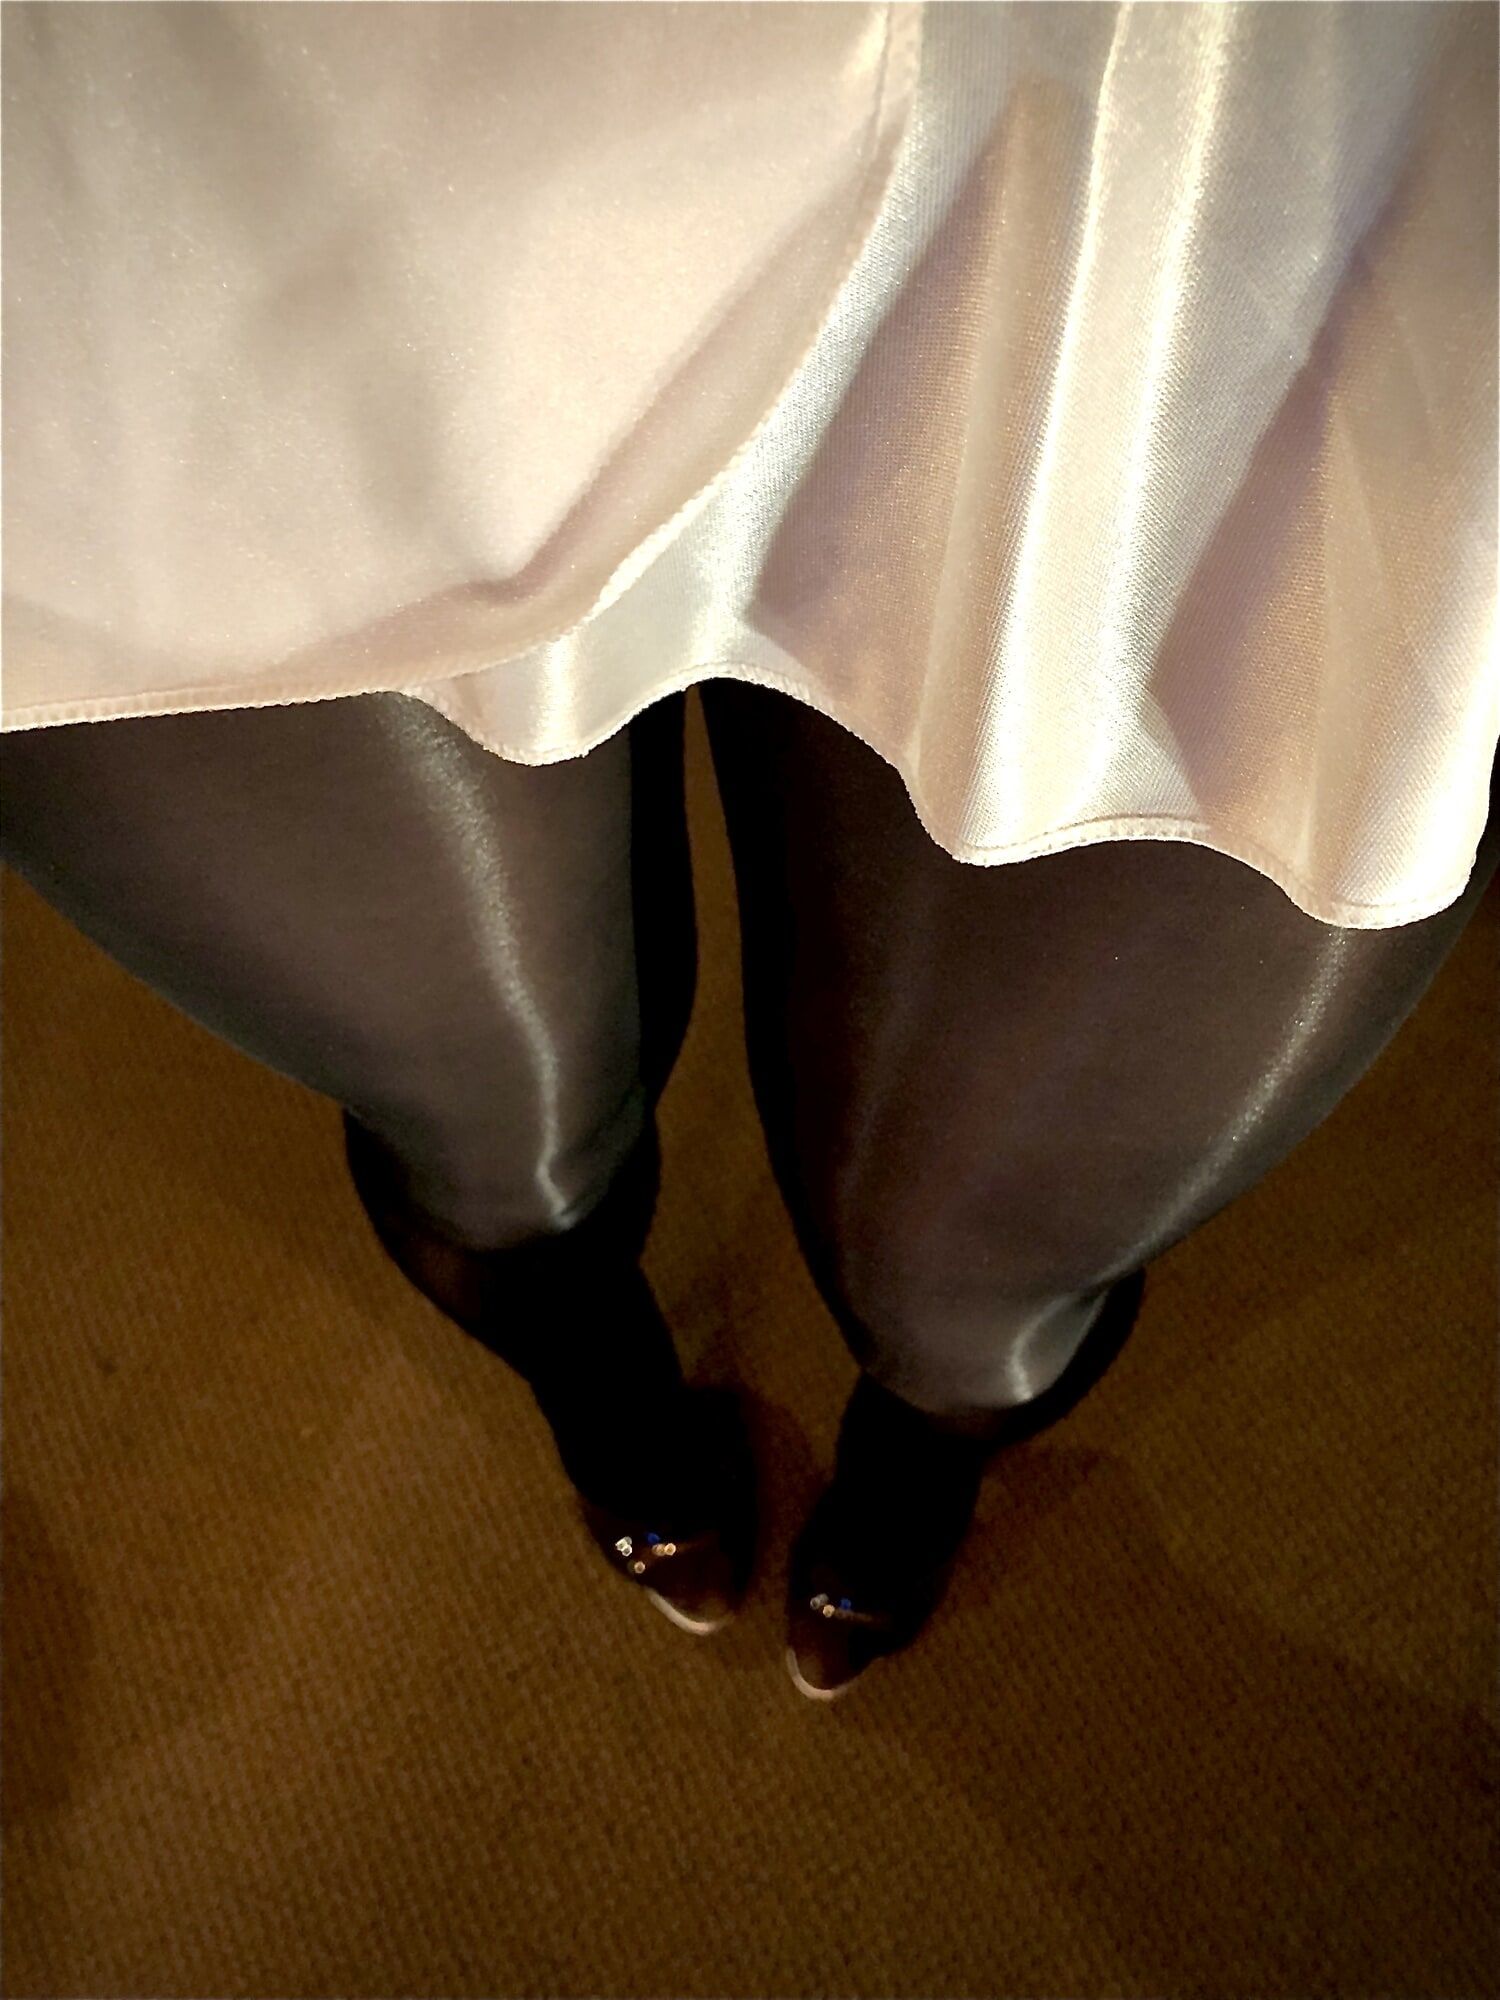 Moments of shiny legs, glossy tights and high heels, #6